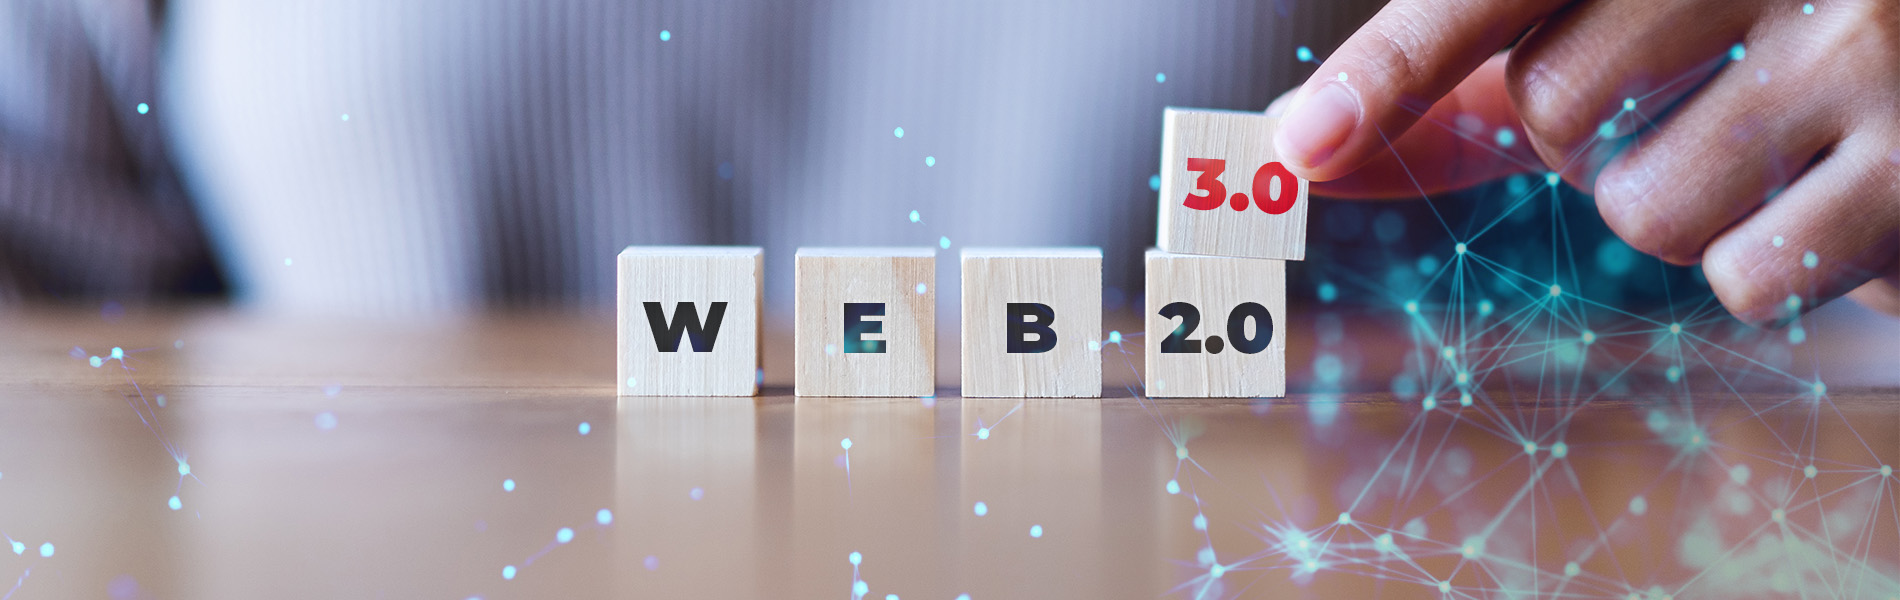 The Next Evolution of the Internet: From Web 2.0 to Web 3.0